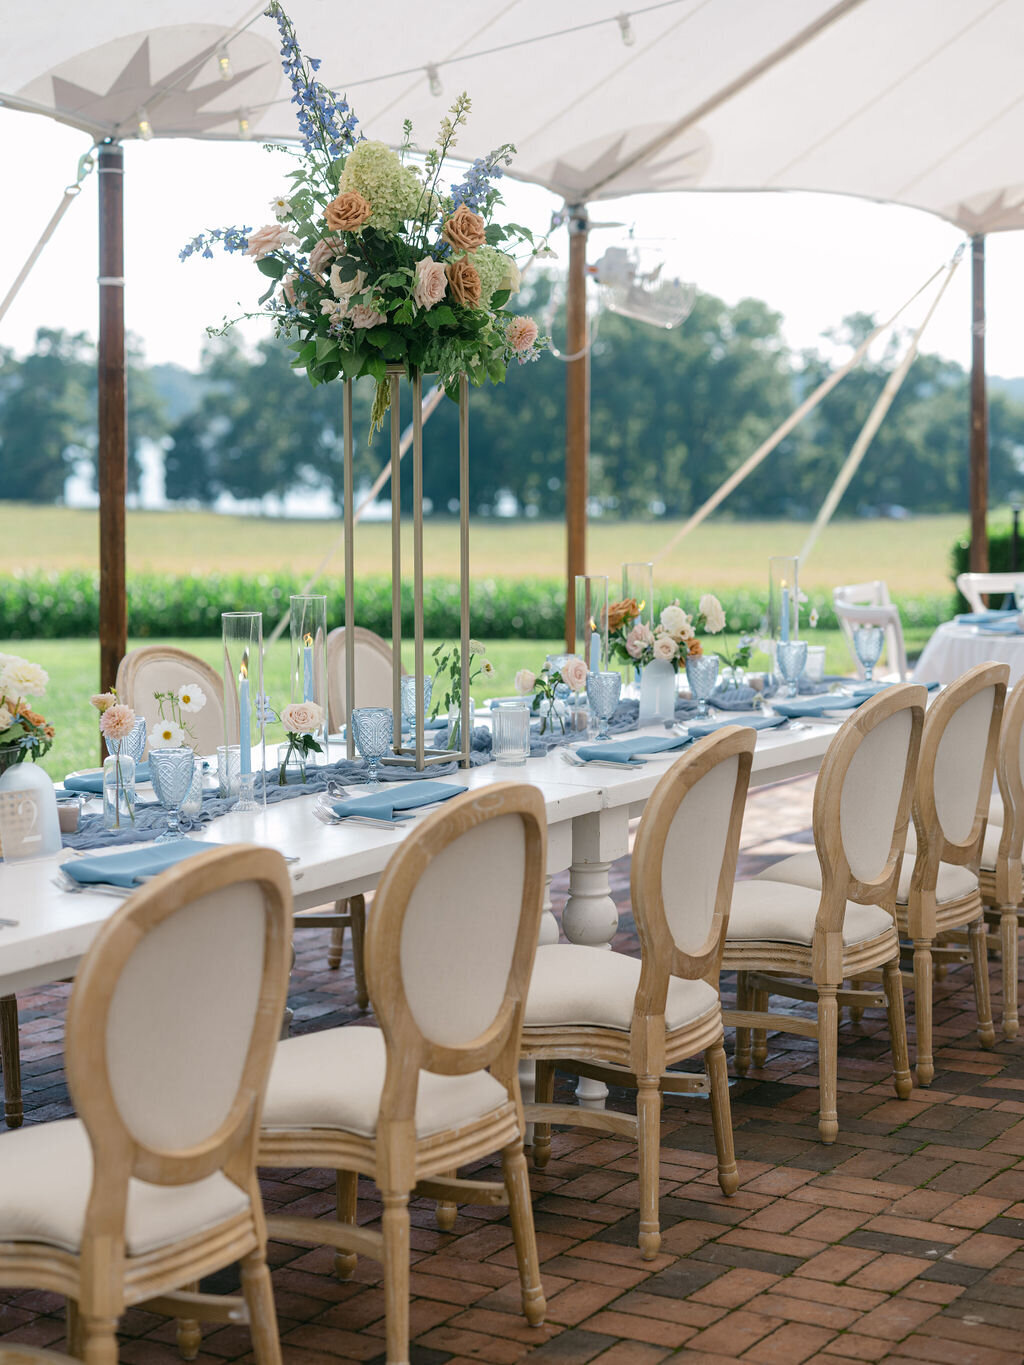 Long head table with large arrangement on a gold stand with florals including green hydrangea, blue delphinium, toffee roses, blush garden roses, and green hanging amaranthus suspended over a tablescape of blue taper candles and floral accents in bud vases.